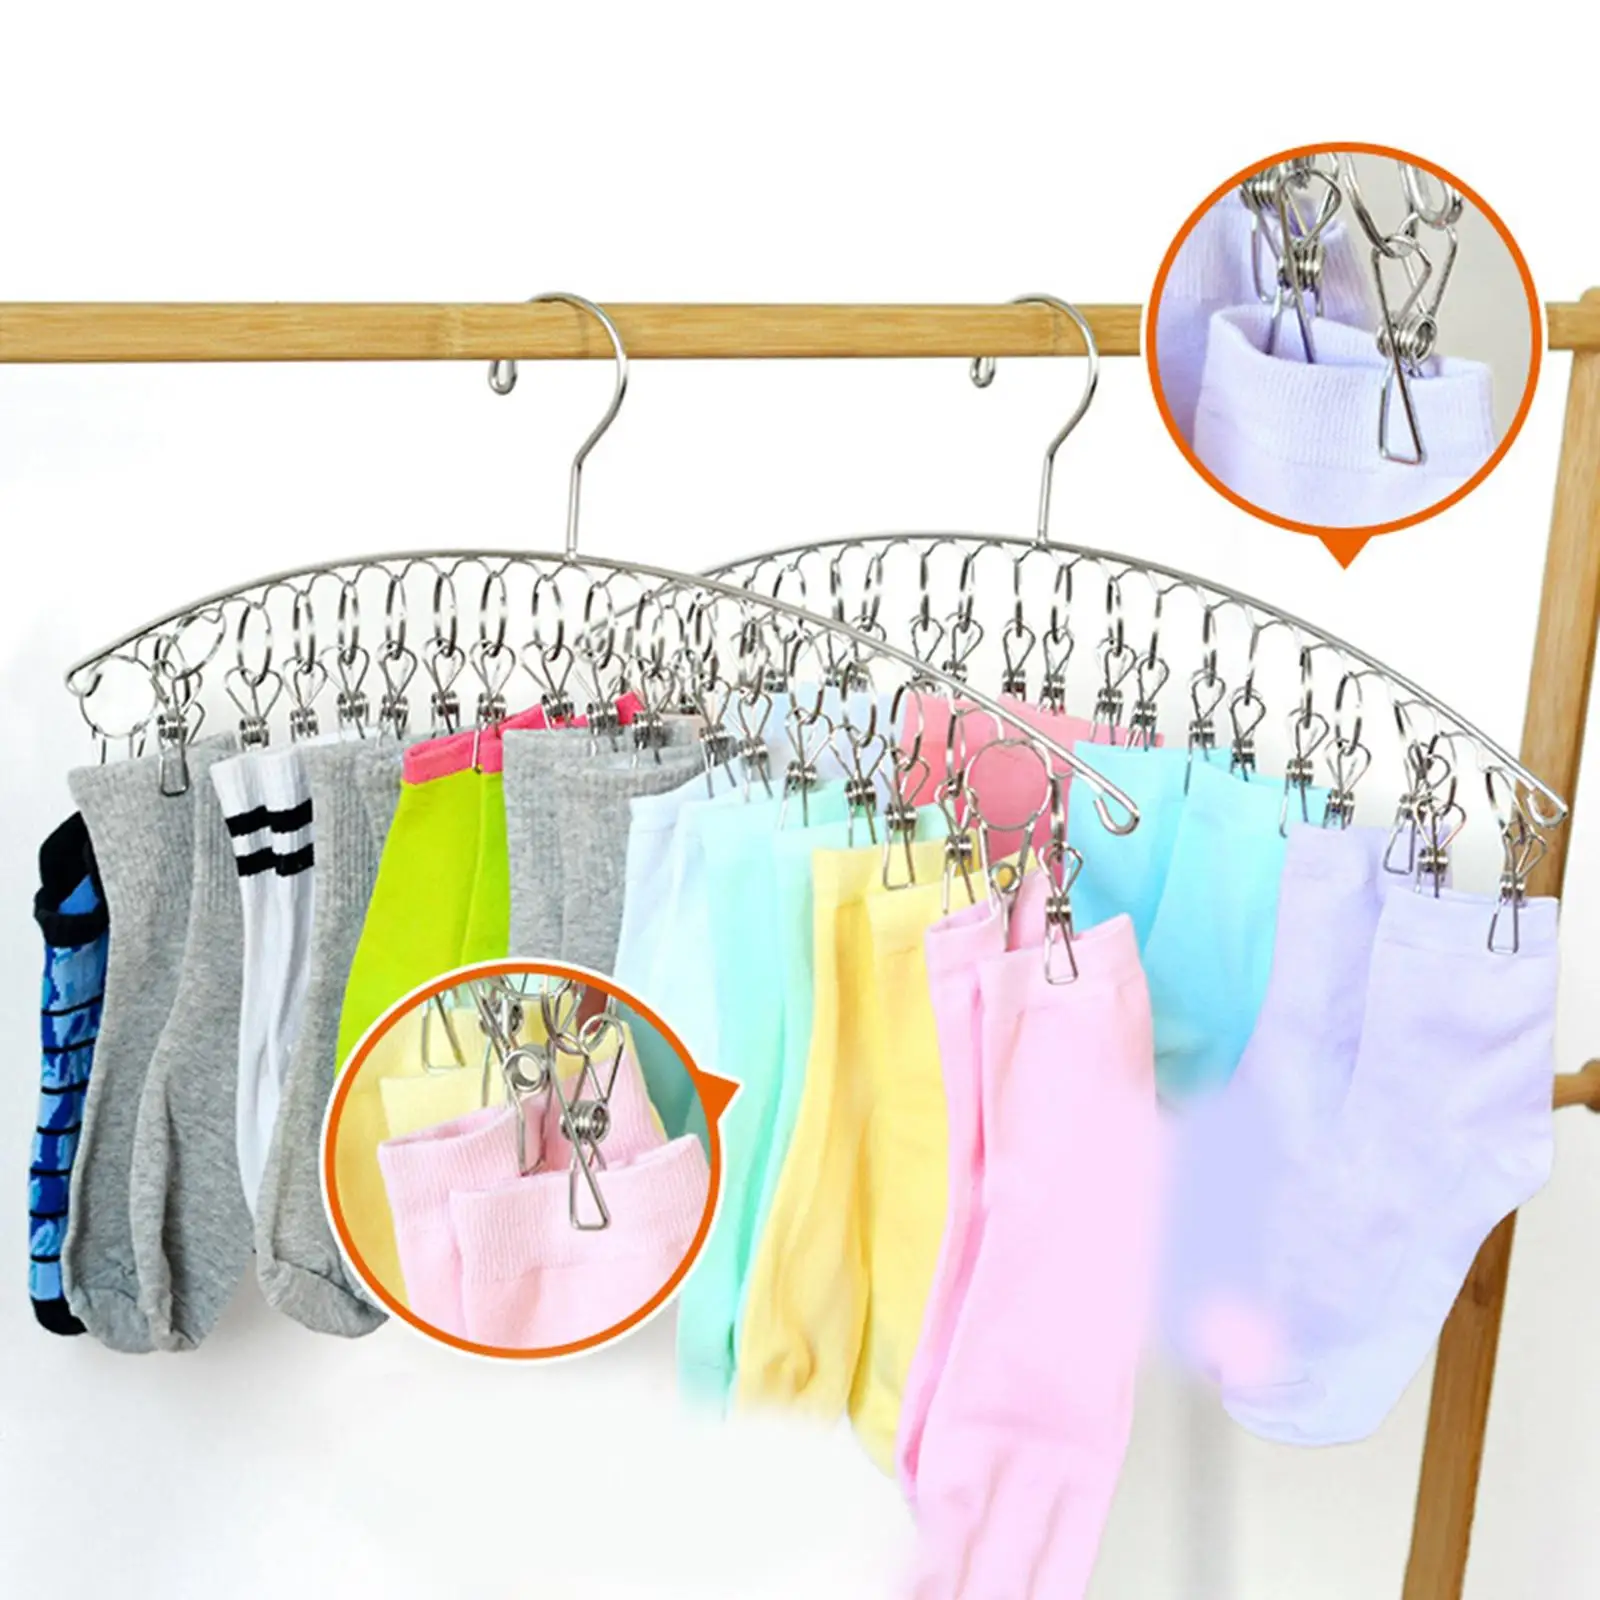 2Pcs Clothes Drying Rack, Laundry Hanger, Space Saving for Drying Socks Underwear